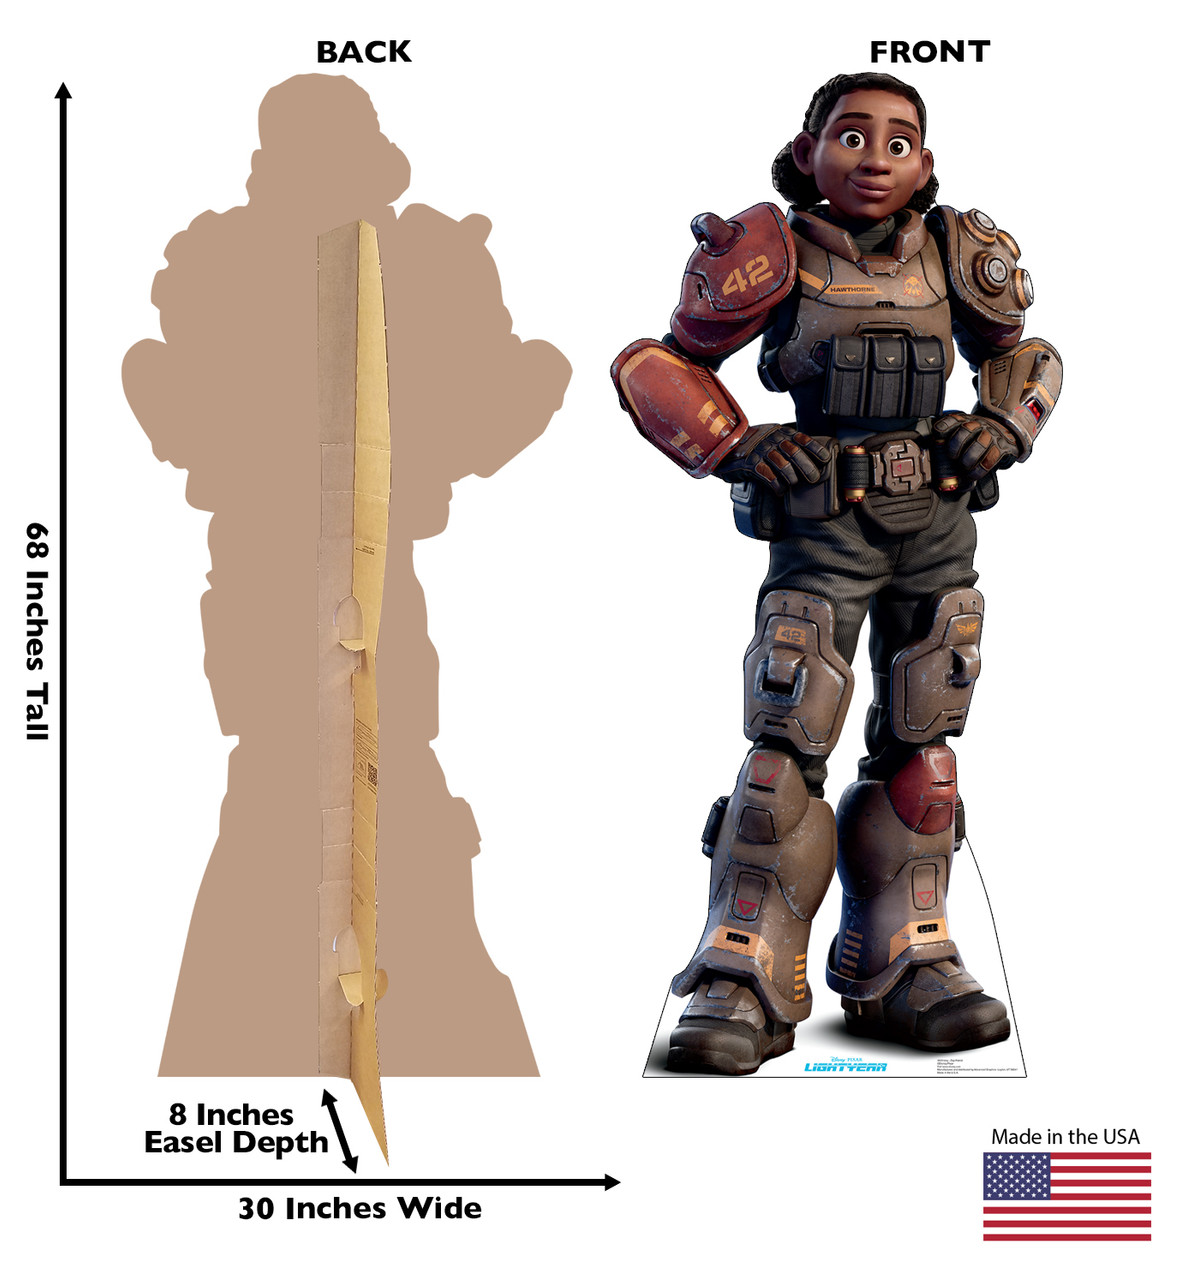 Life-size cardboard standee of Izzy-Zap Patroll from Disney/Pixar movie Lightyear with back and front dimensions.